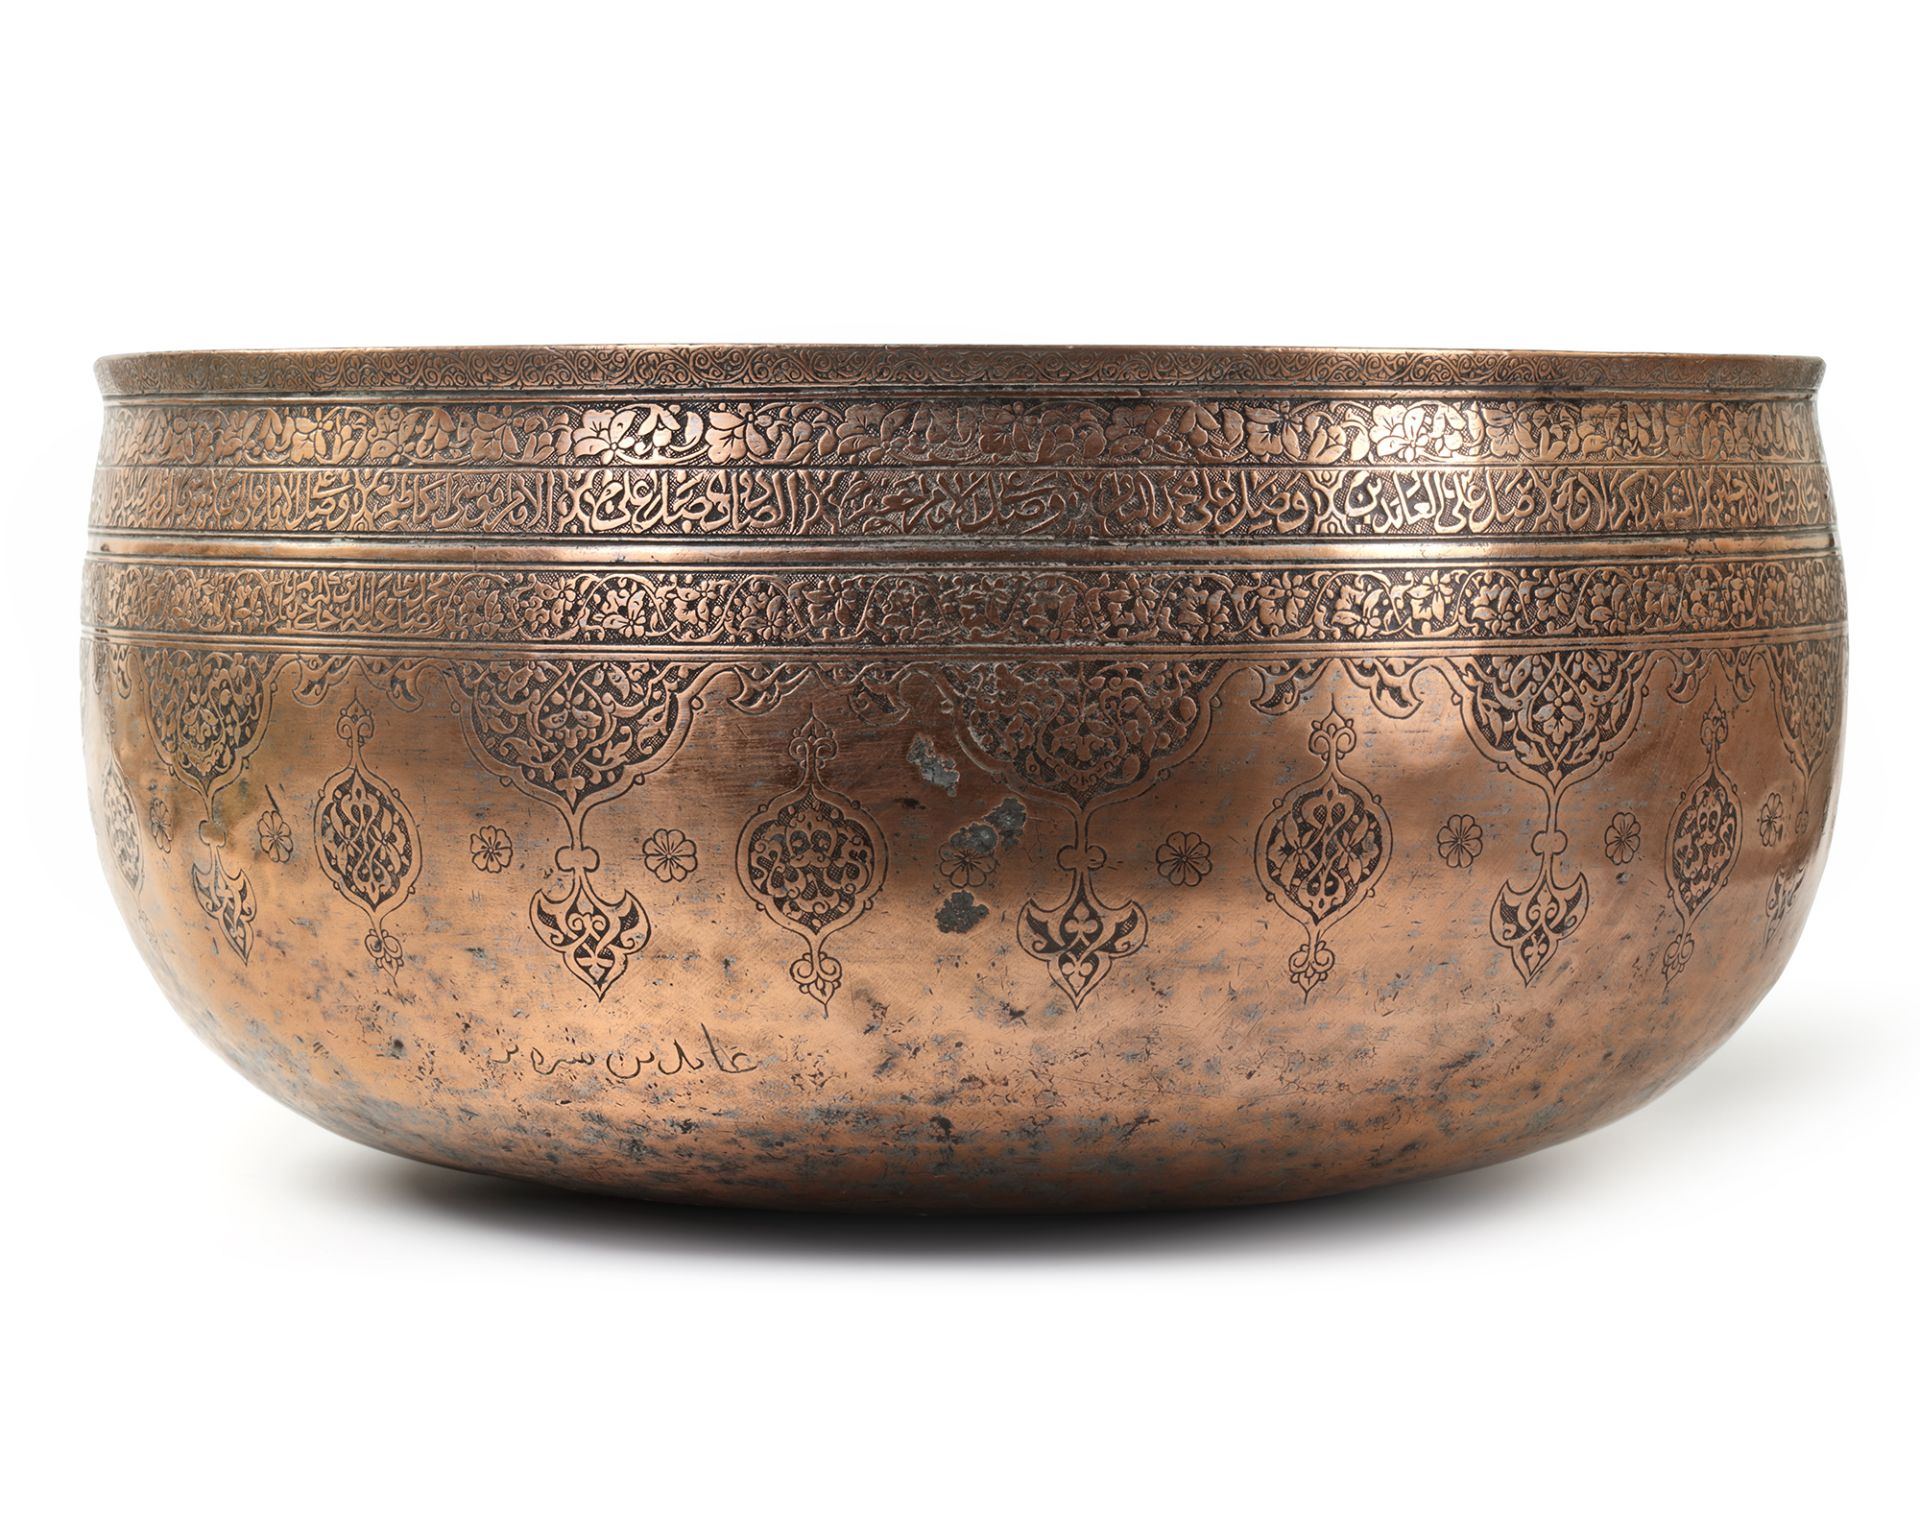 A MONUMENTAL LATE TIMURID ENGRAVED COPPER BOWL CENTRAL ASIA, LATE 15TH/EARLY 16TH CENTURY - Image 4 of 6